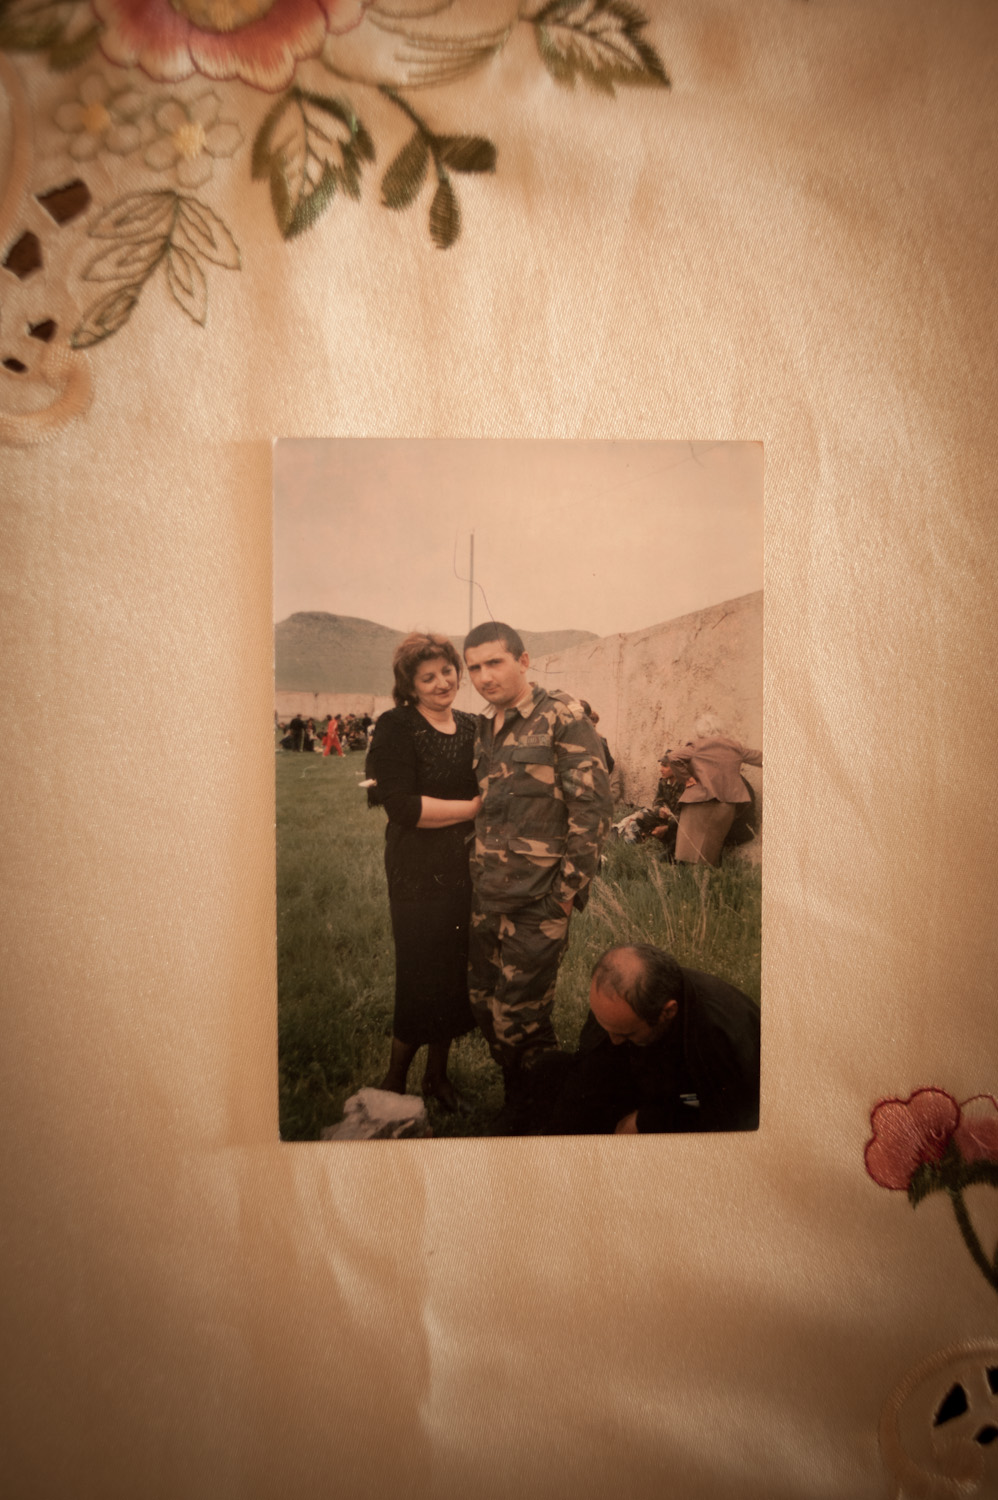  While serving, Tigran recounted that a younger, weaker soldier was being
 hazed by the officers and was hit. Tigran had stepped in and criticized
 the officers. The Ohanjanyans believe their son's death was related to 
this incident.  